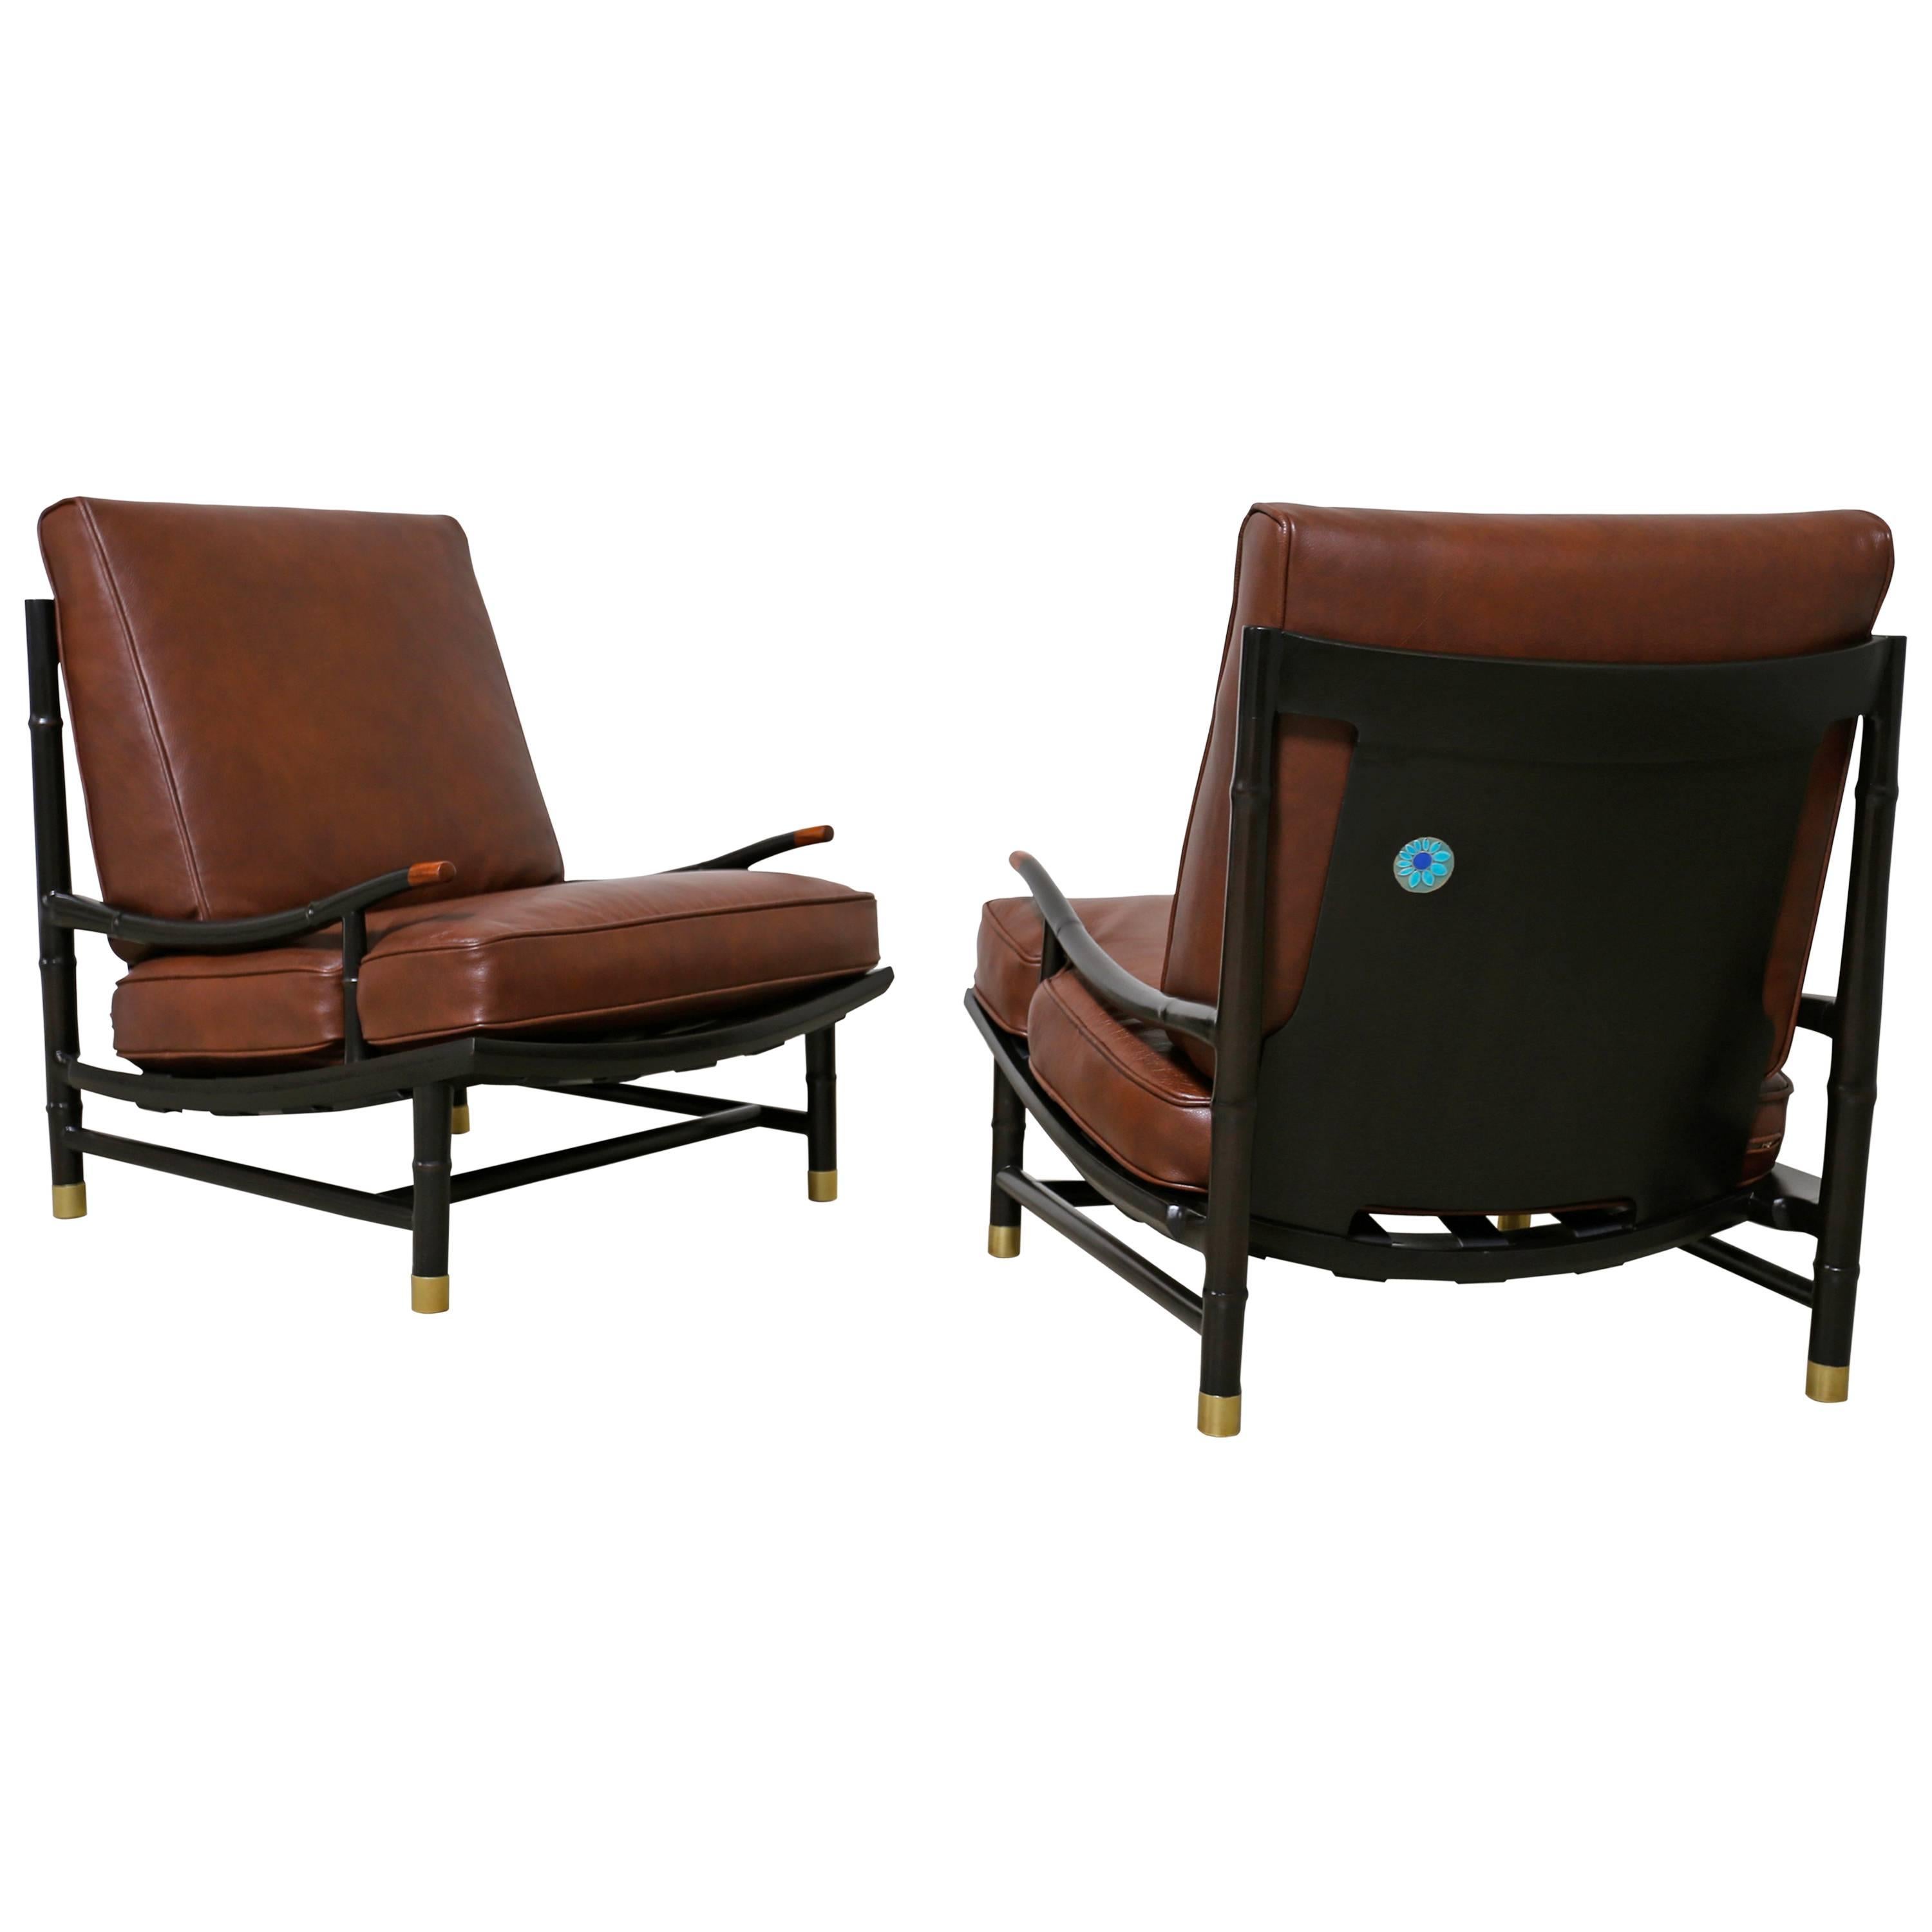 Rare Lounge Chairs by Frank Kyle with Accents by Maggie Howe 